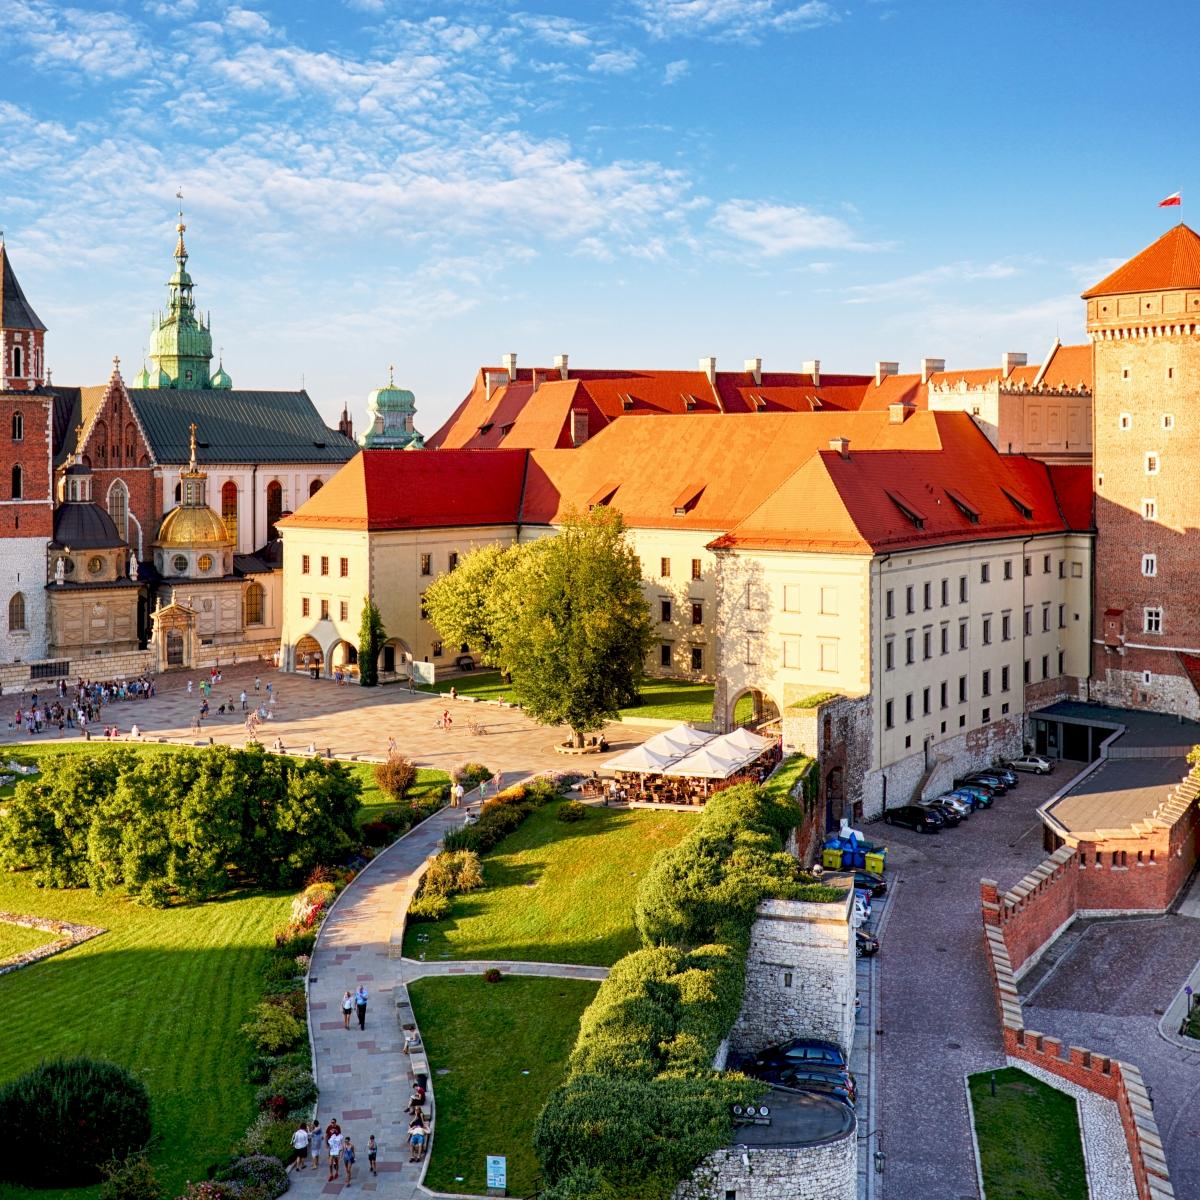 Wawel Hill - tour with an audio guide